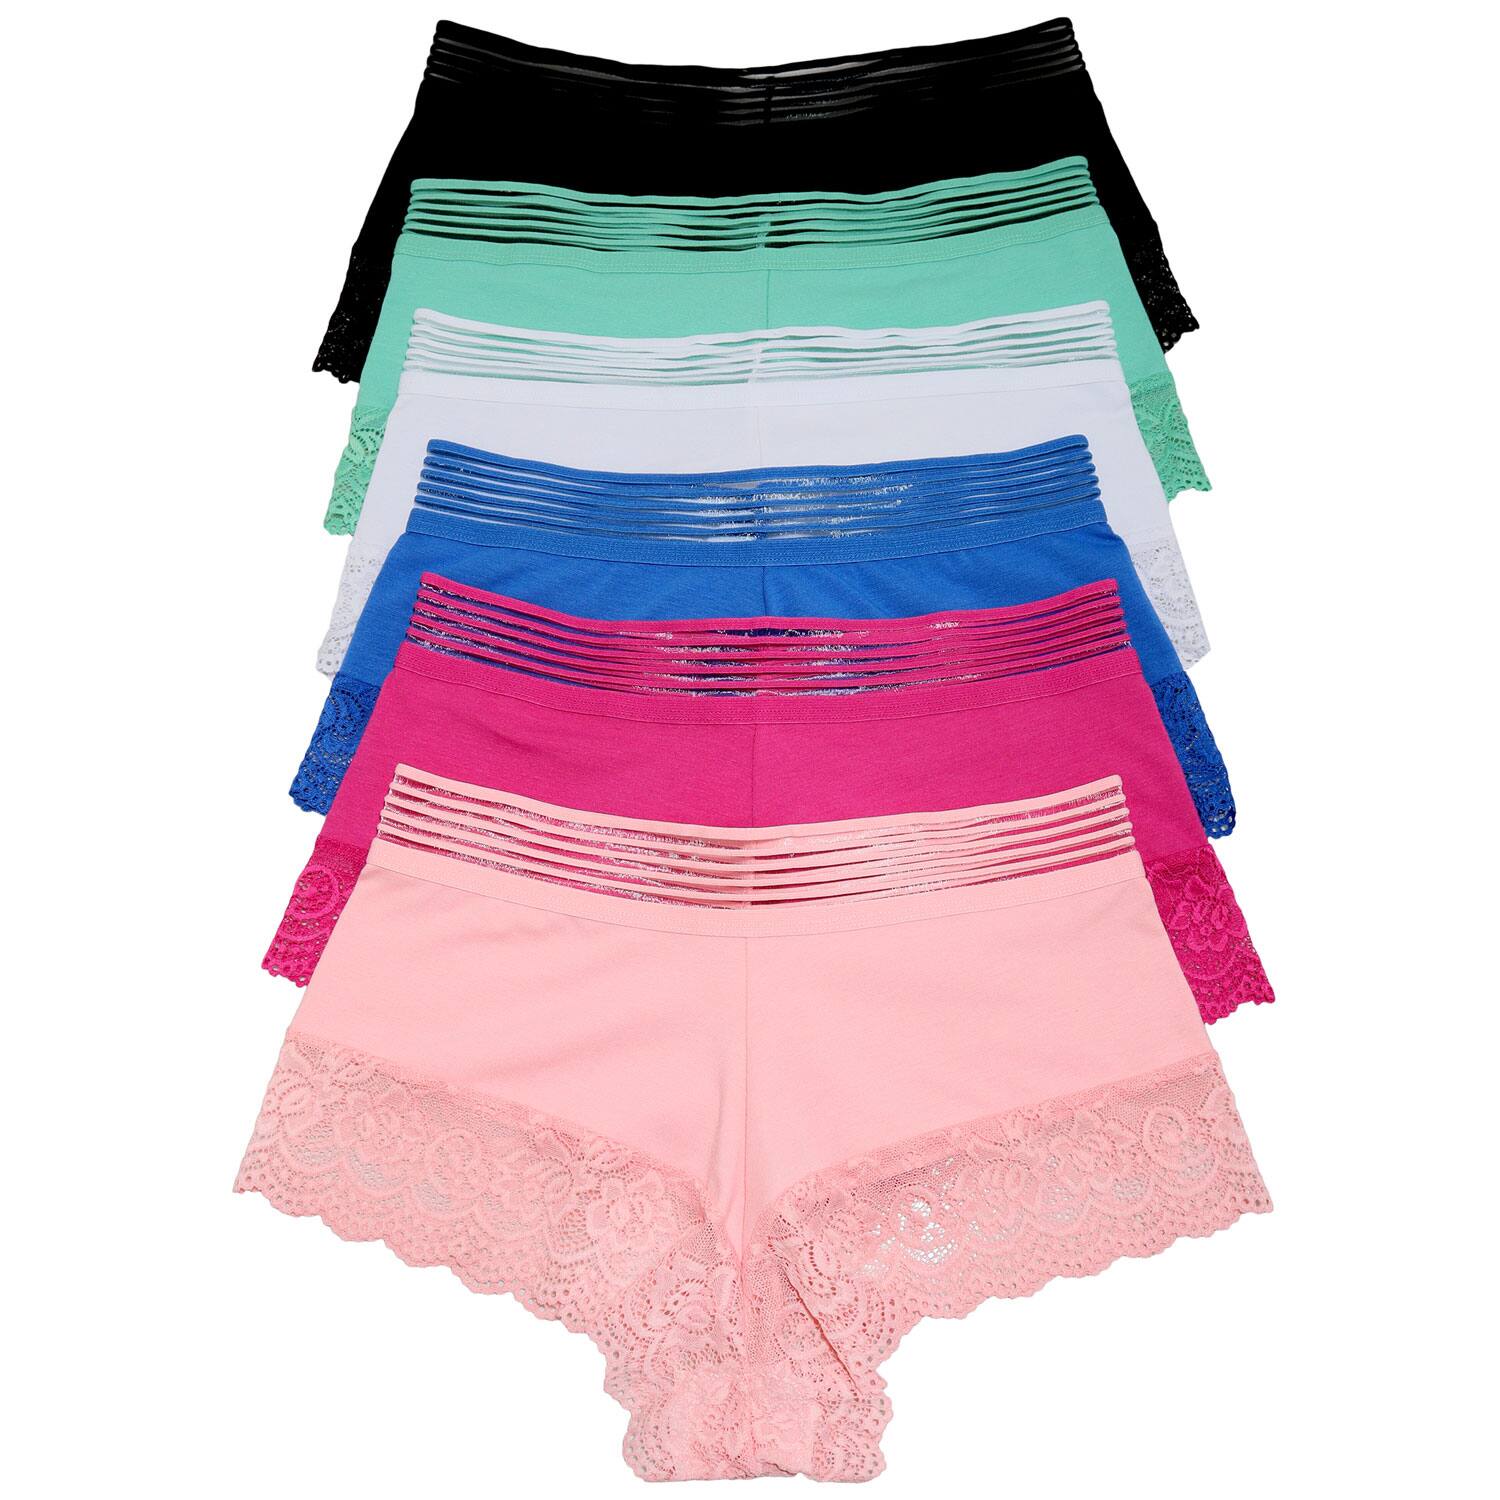 6-Pack Cotton Boyshort Panties With Leg Lace Accent $14.24 + Free shipping